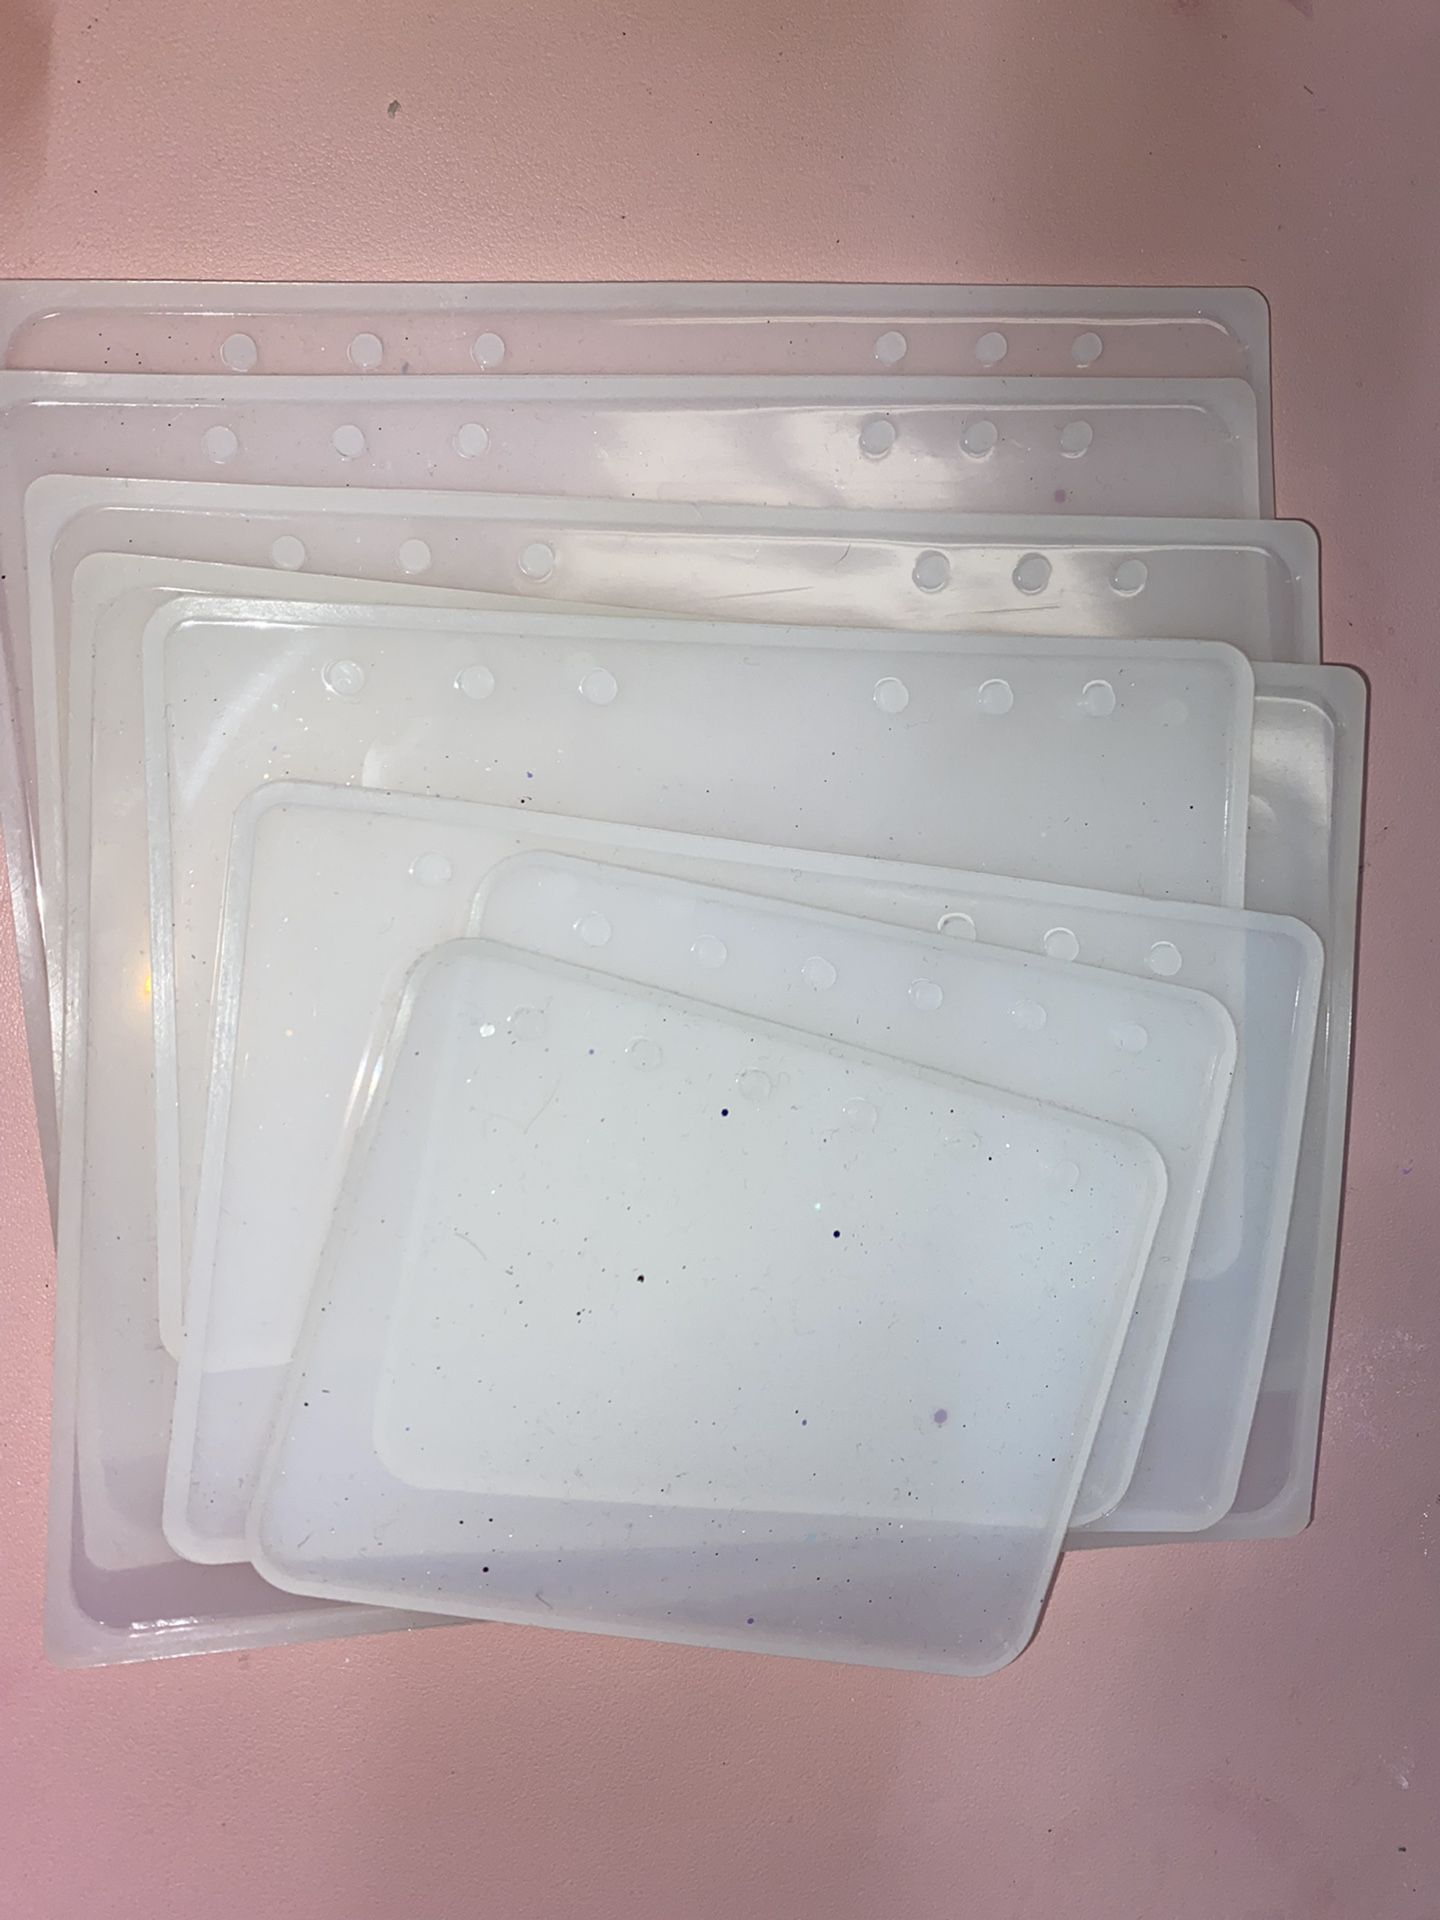 8 Notebook molds- $10 for all 